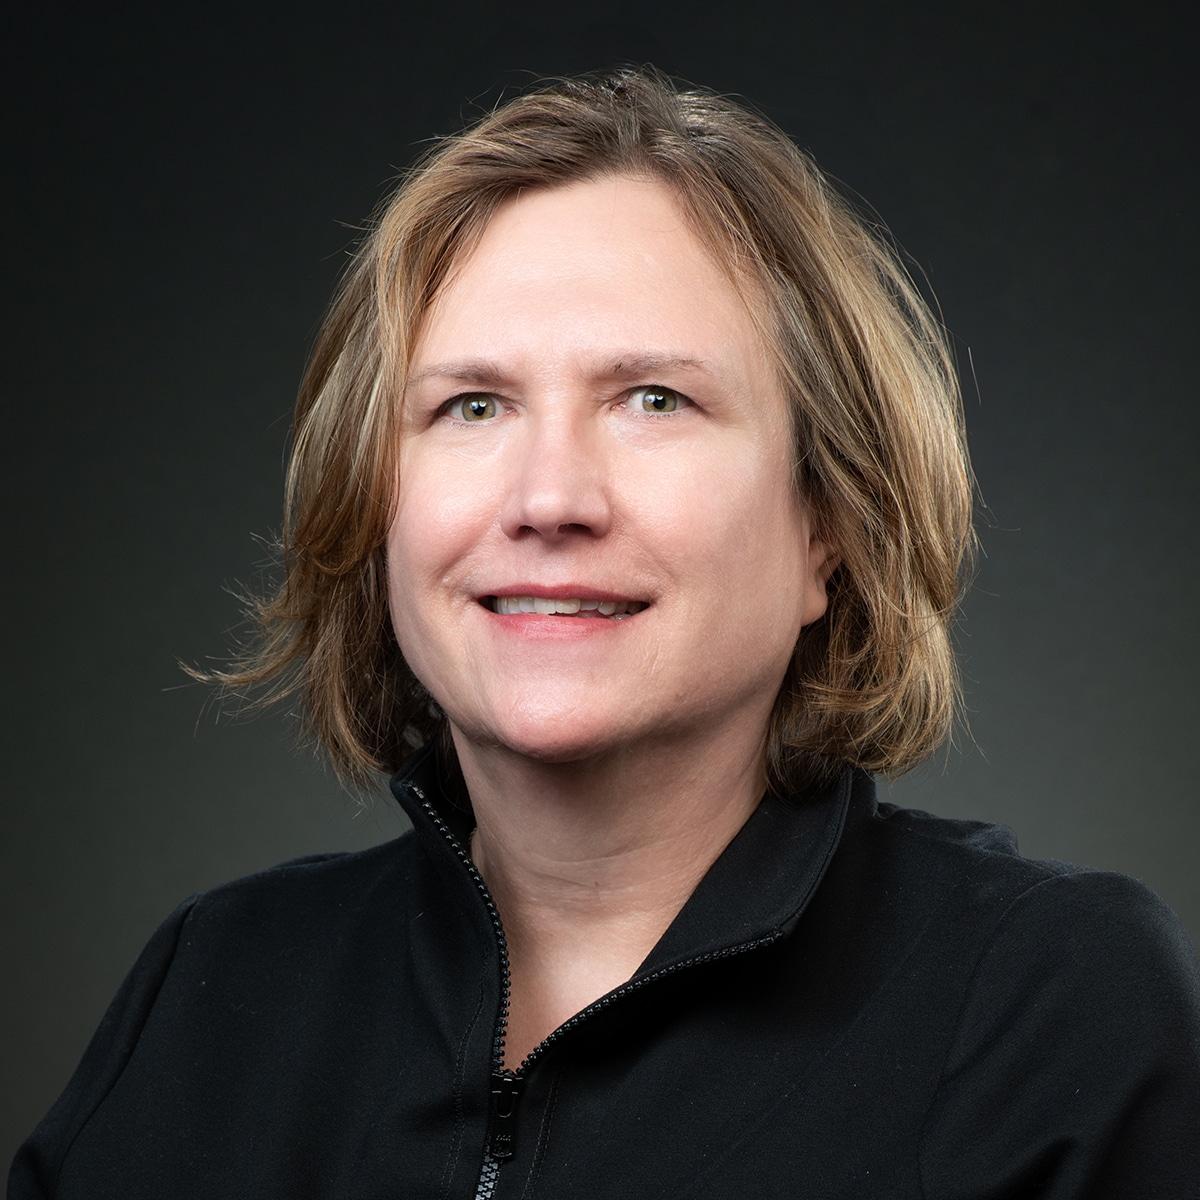 Kristin Pope is the Deputy Director of Management, Operations, Policy and Communications for the Center for Forecasting and Outbreak Analytics. She has short blond hair, against a dark grey background, wearing a black shirt.